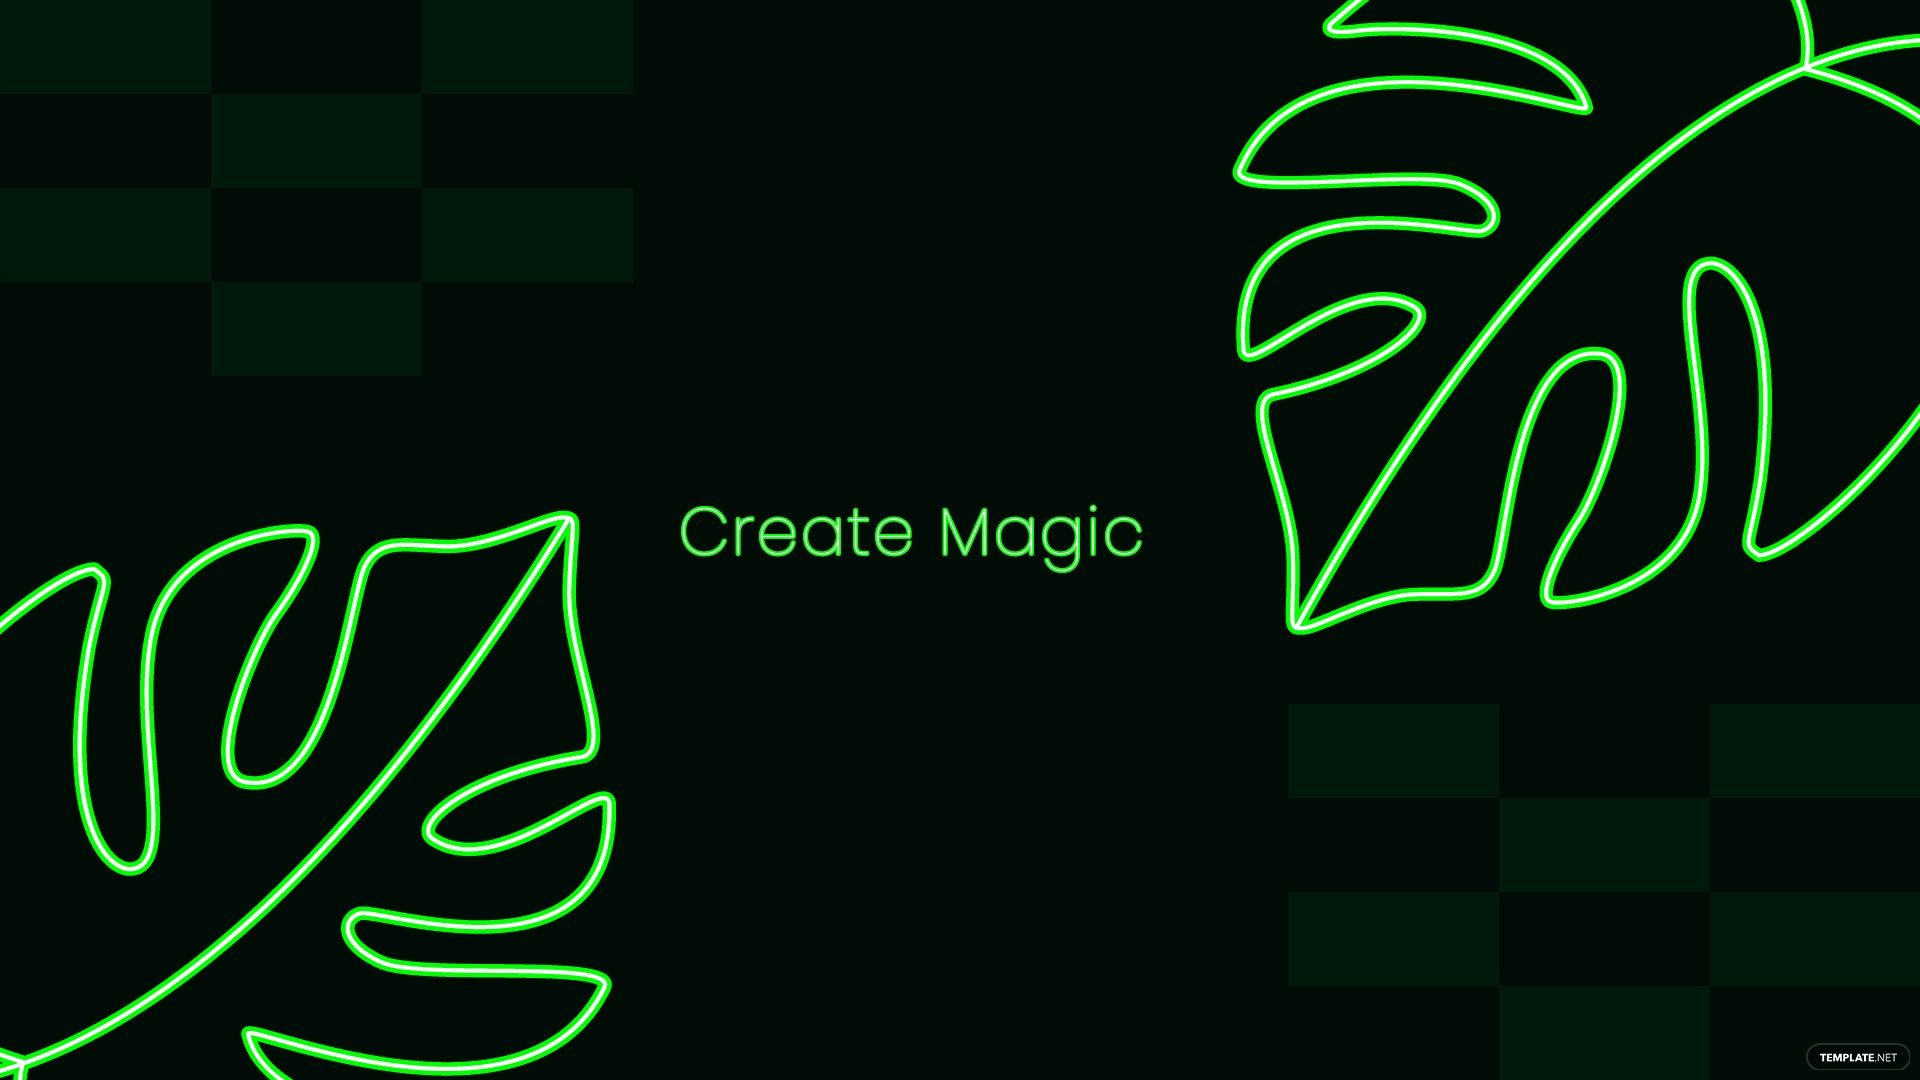 Create Magic wallpaper - green neon leaves on a black background - Neon green, neon pink, light green, green, lime green